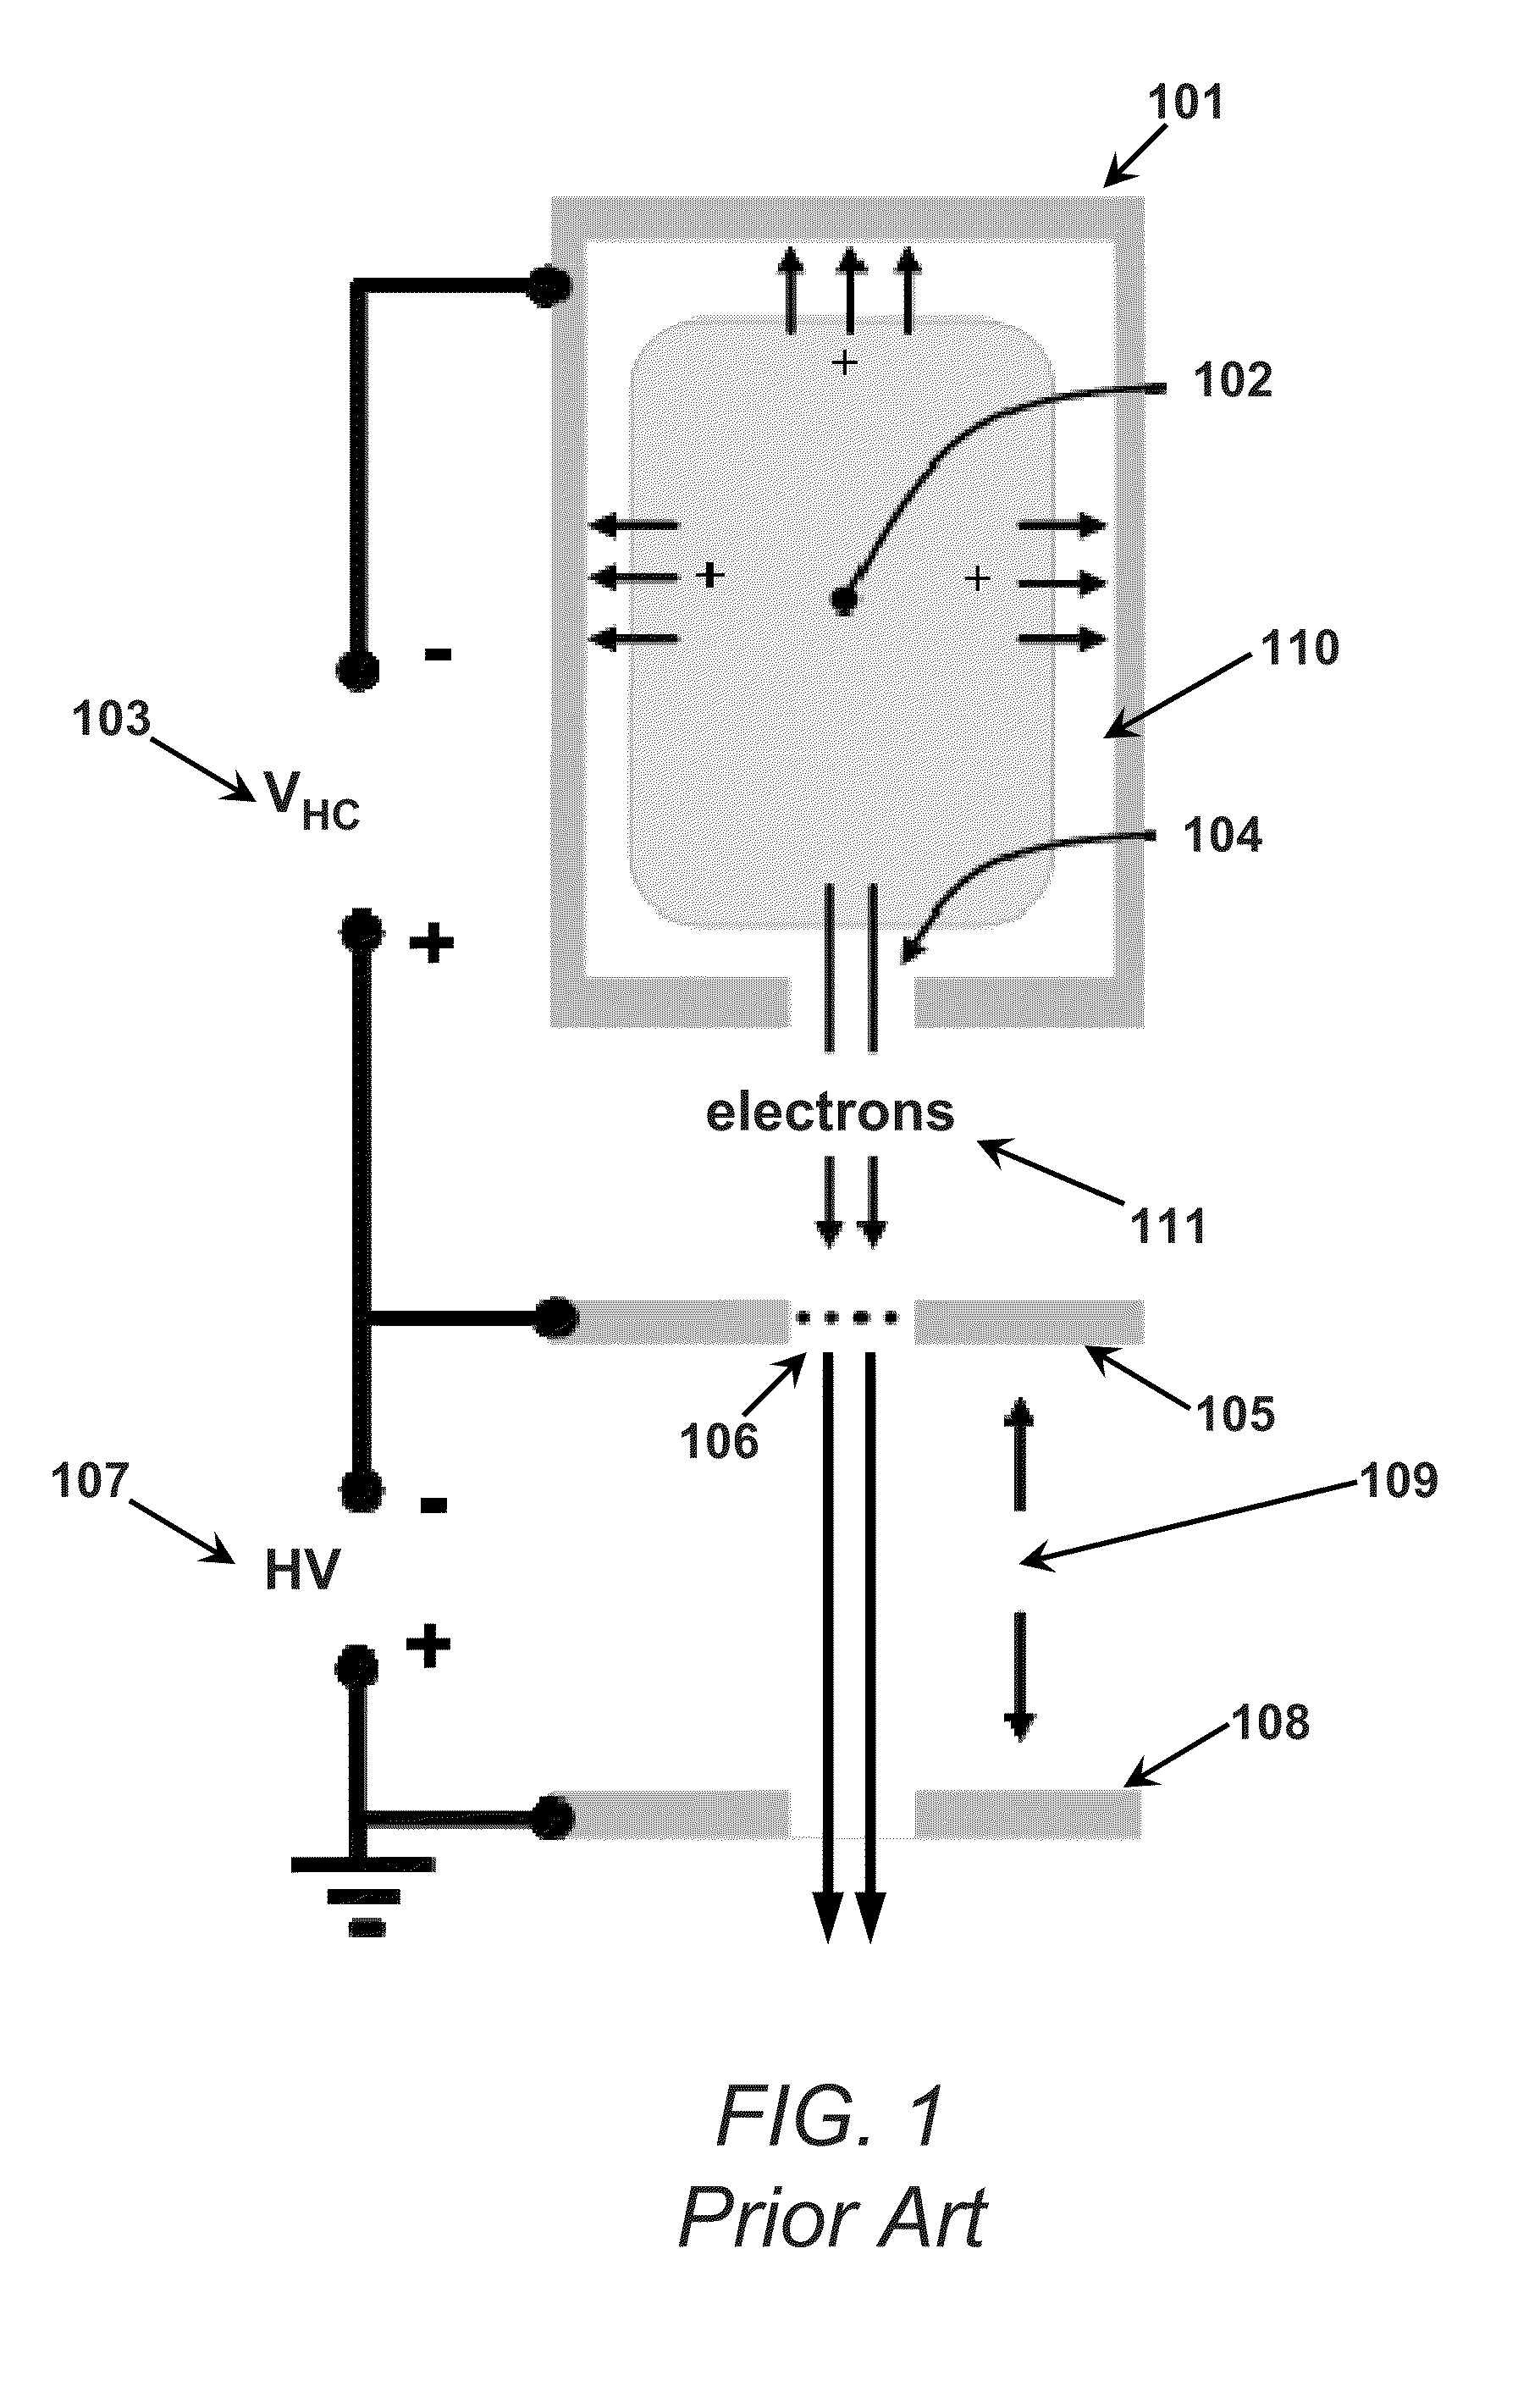 Apparatus and Method for Regulating the Output of a Plasma Electron Beam Source